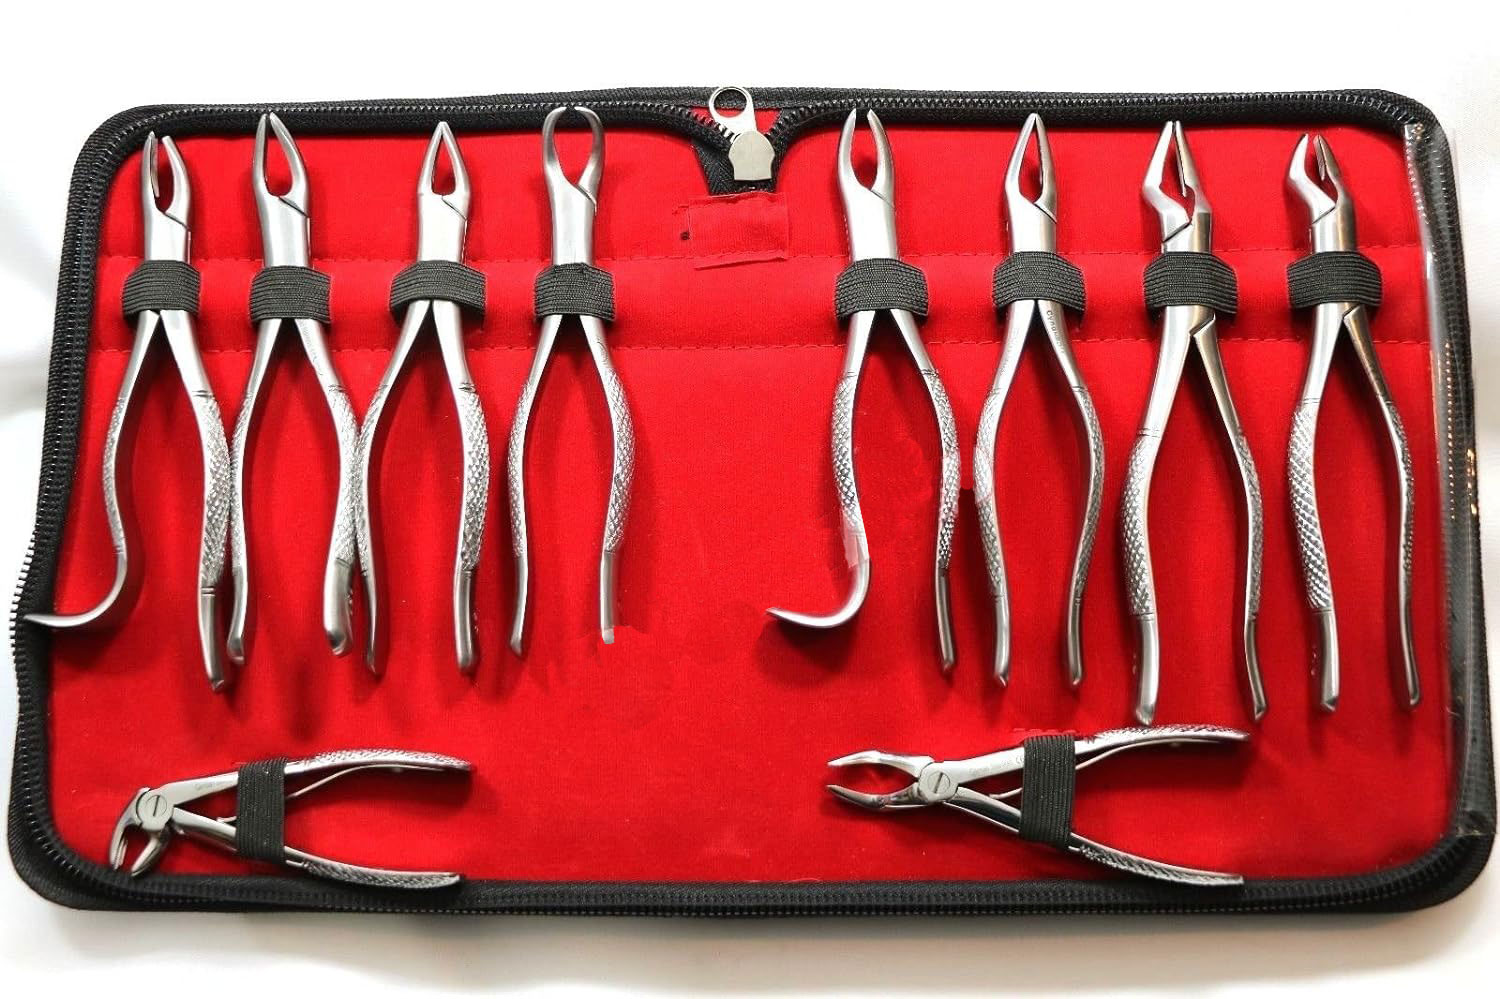 Set of 10 Each German Stainless Oral Dental Extraction Surgery EXTRACTING Forceps Dental Instrument